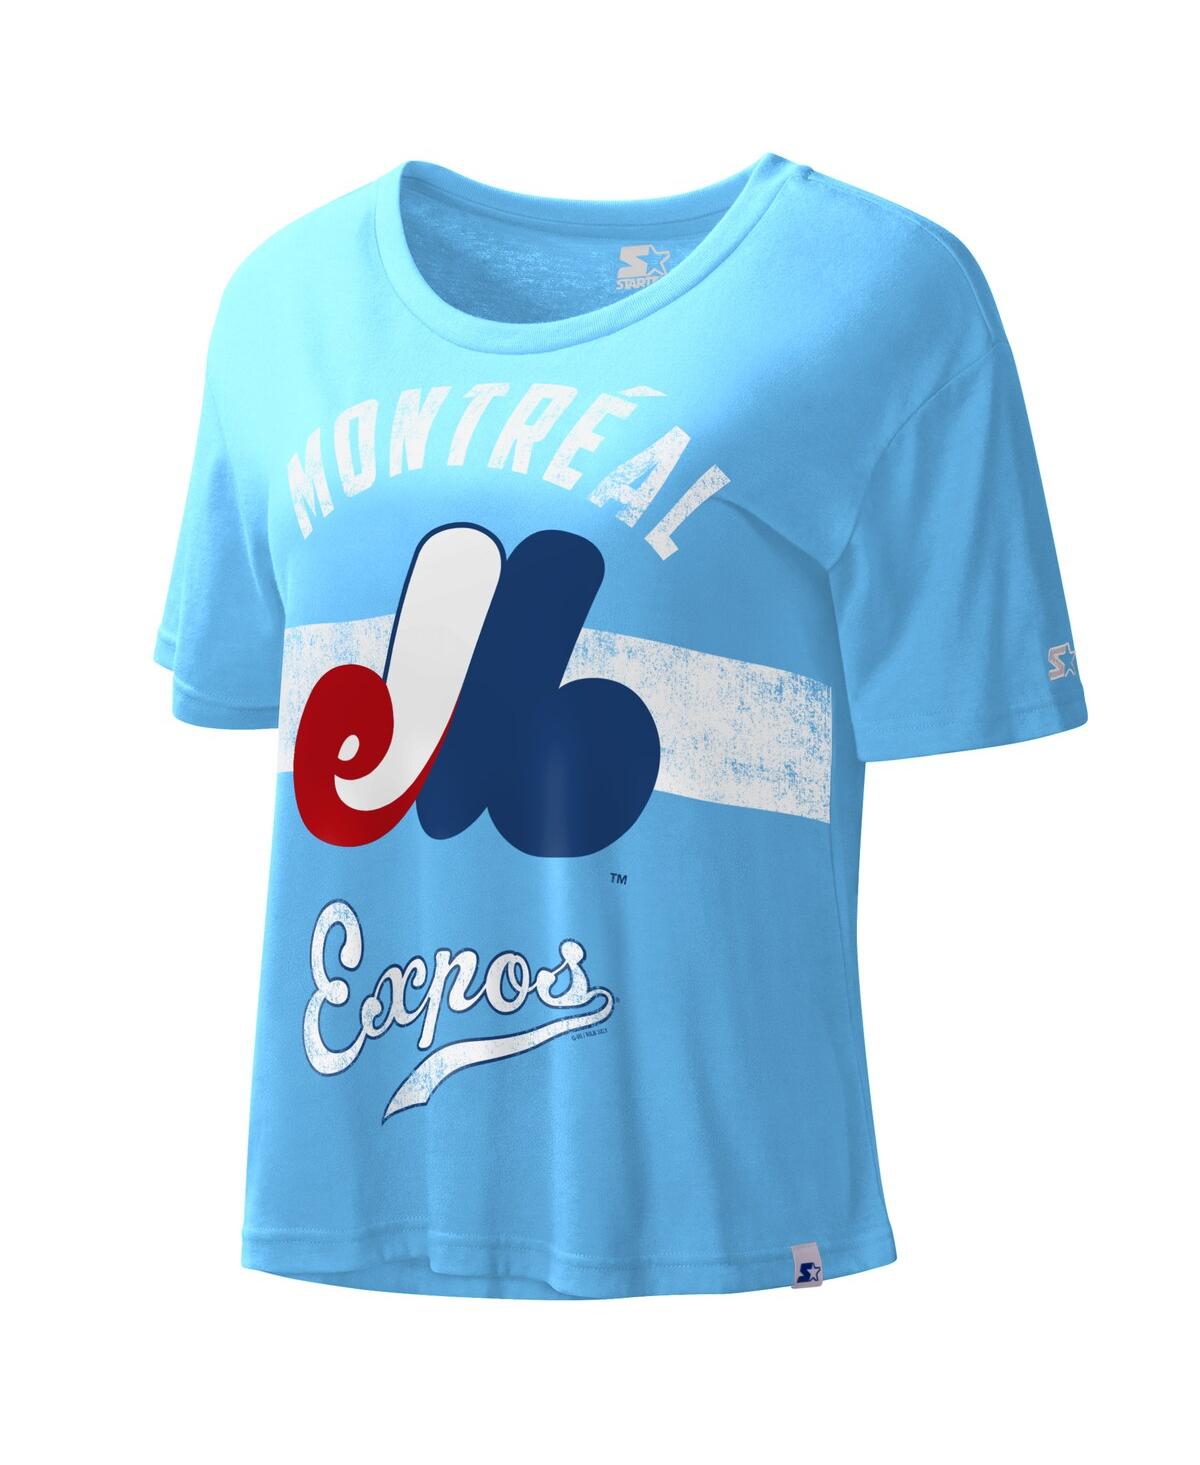 Shop Starter Women's  Light Blue Distressed Montreal Expos Cooperstown Collection Record Setter Crop Top